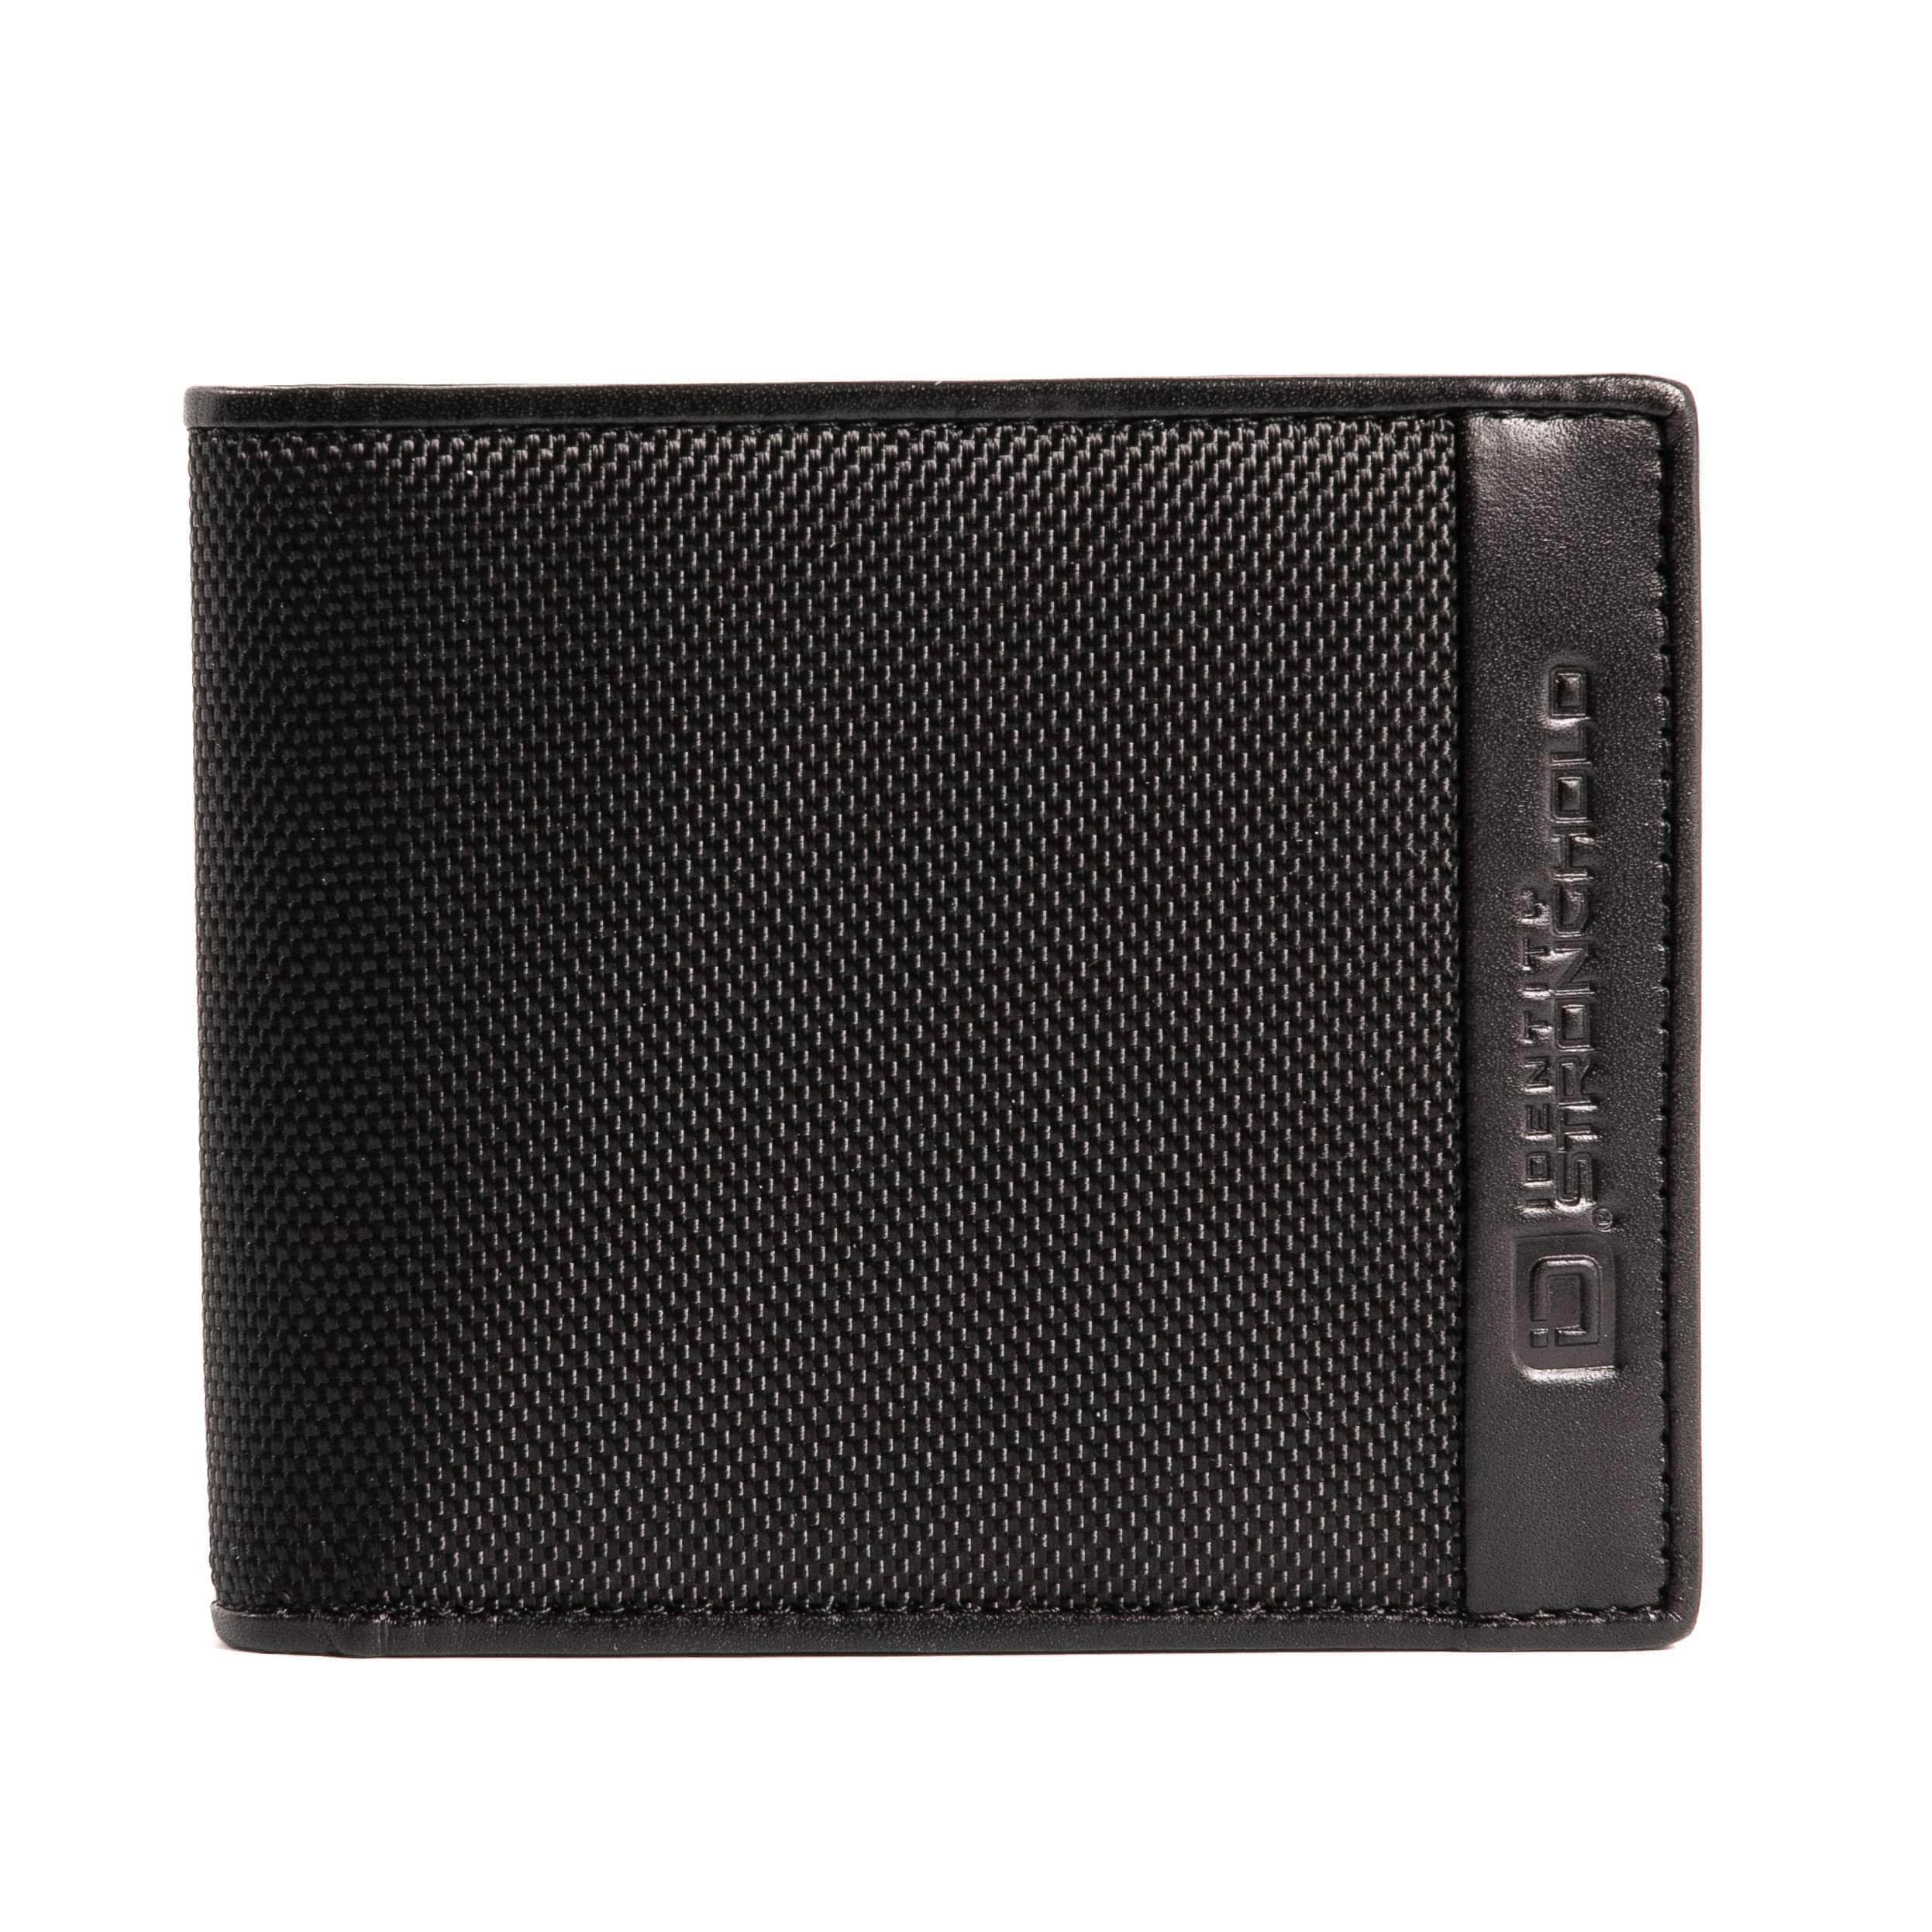 ID Stronghold Men's Wallet Black Mens RFID Wallet - Slim 7 Slot Bifold With ID in Leather and Nylon